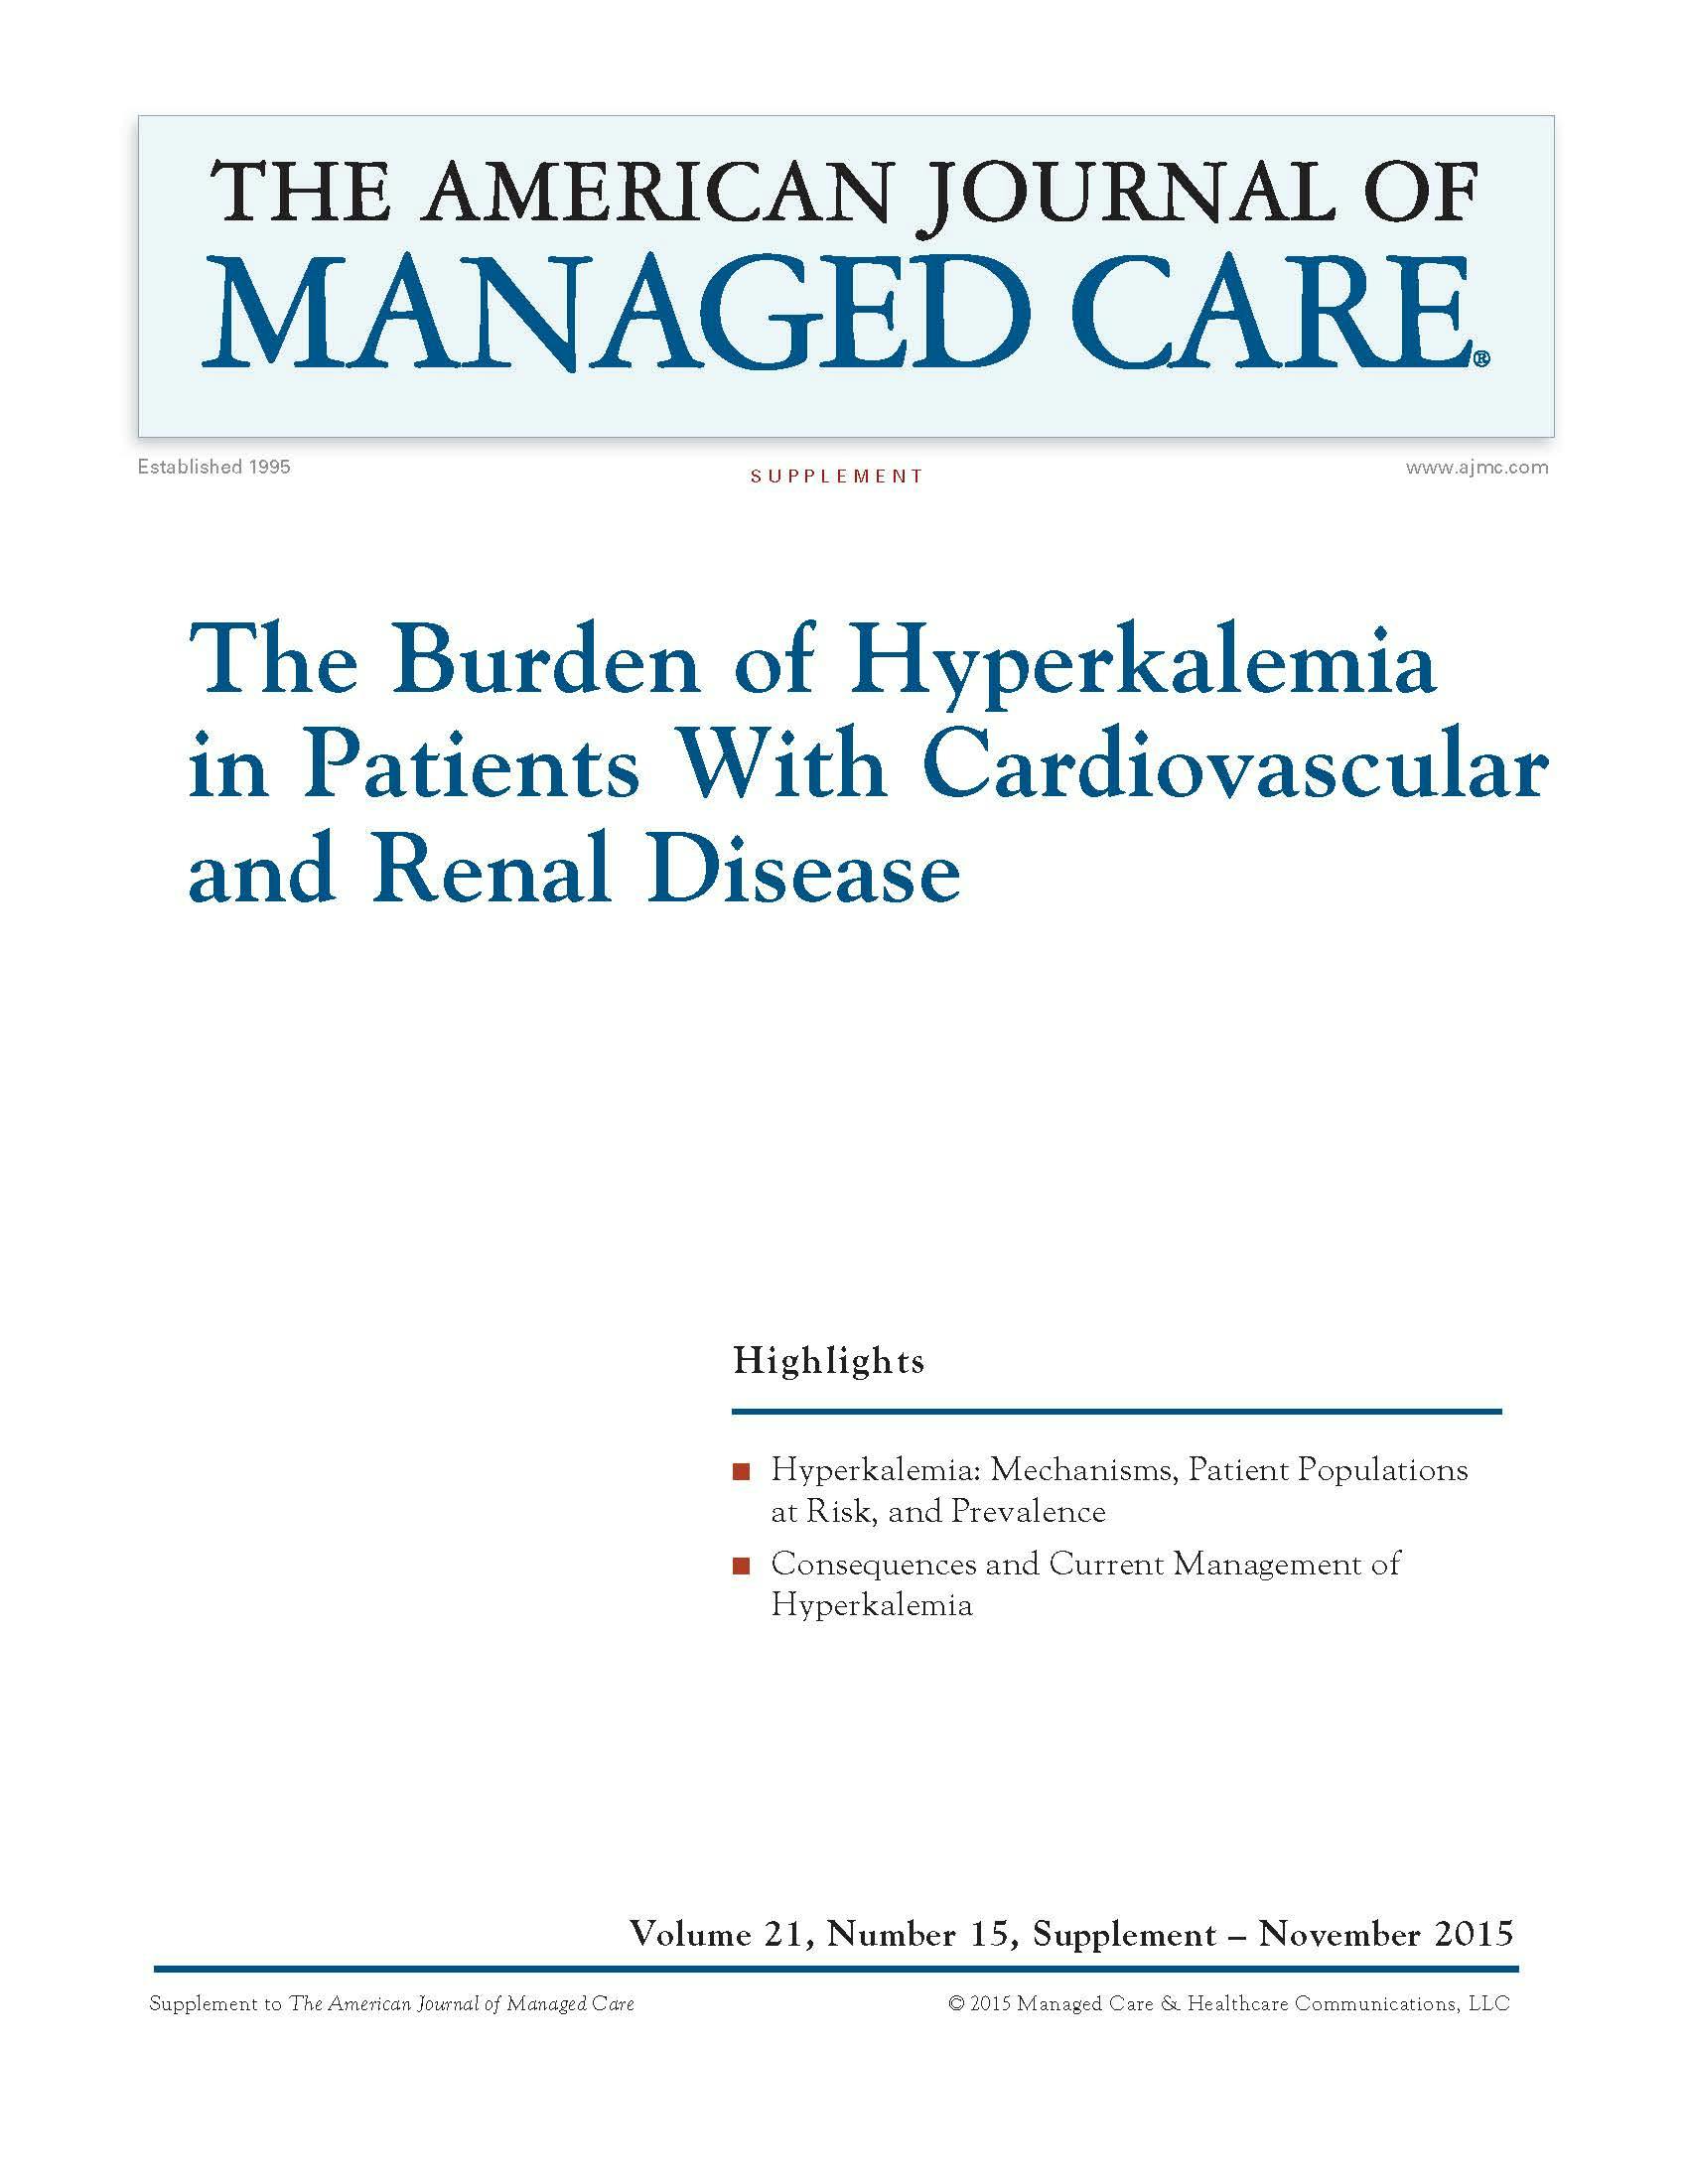 The Burden of Hyperkalemia in Patients With Cardiovascular and Renal Disease